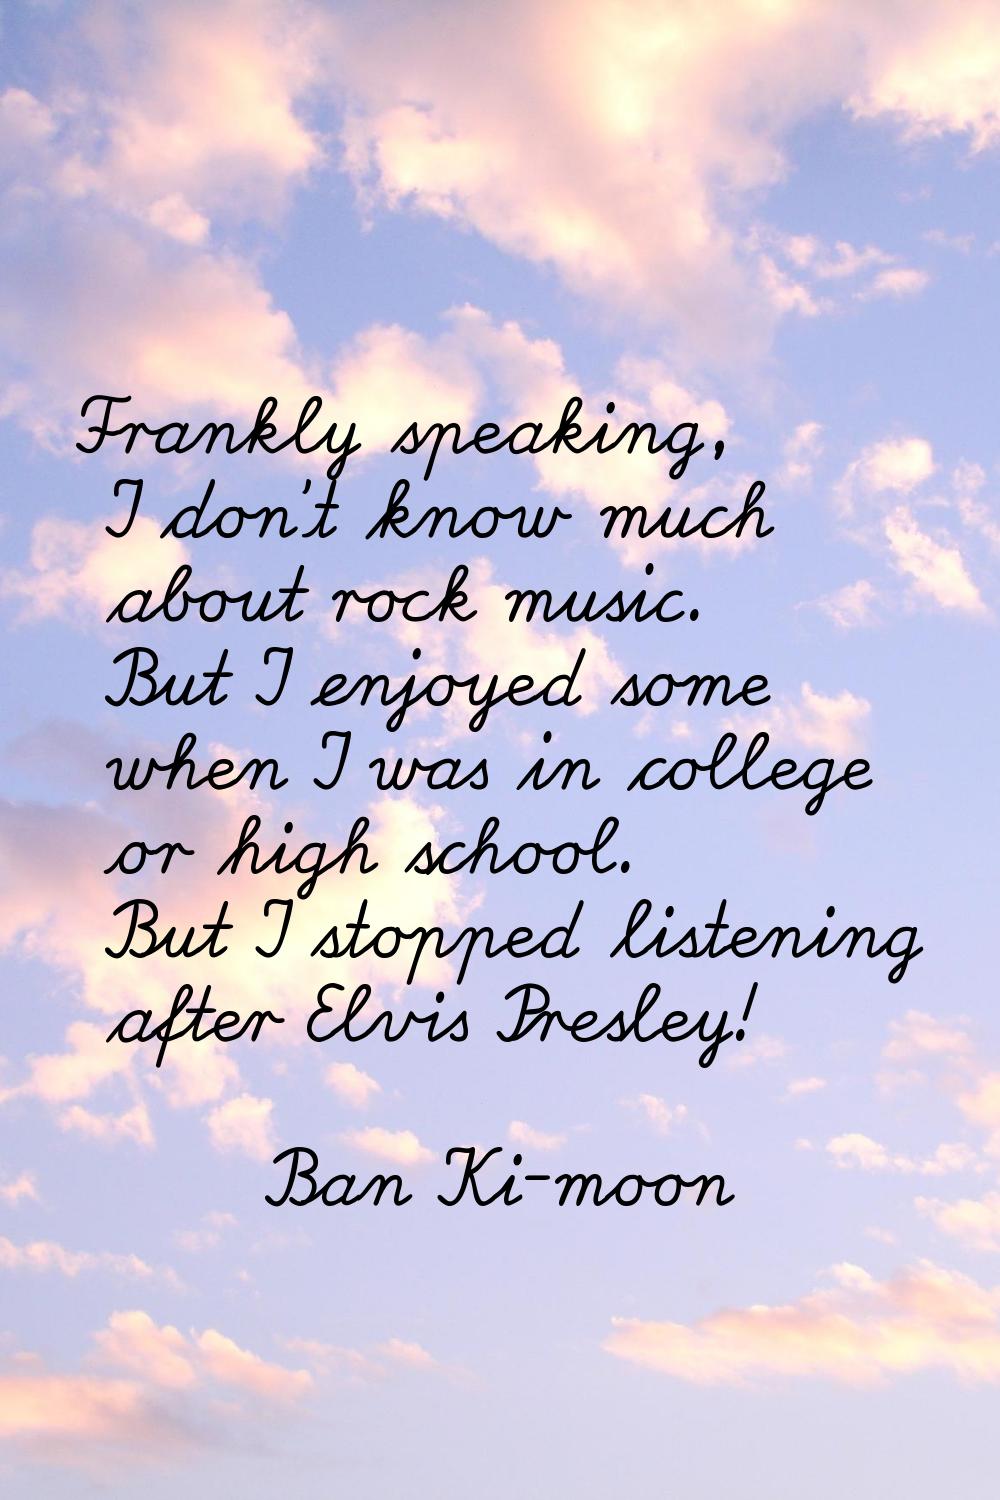 Frankly speaking, I don't know much about rock music. But I enjoyed some when I was in college or h